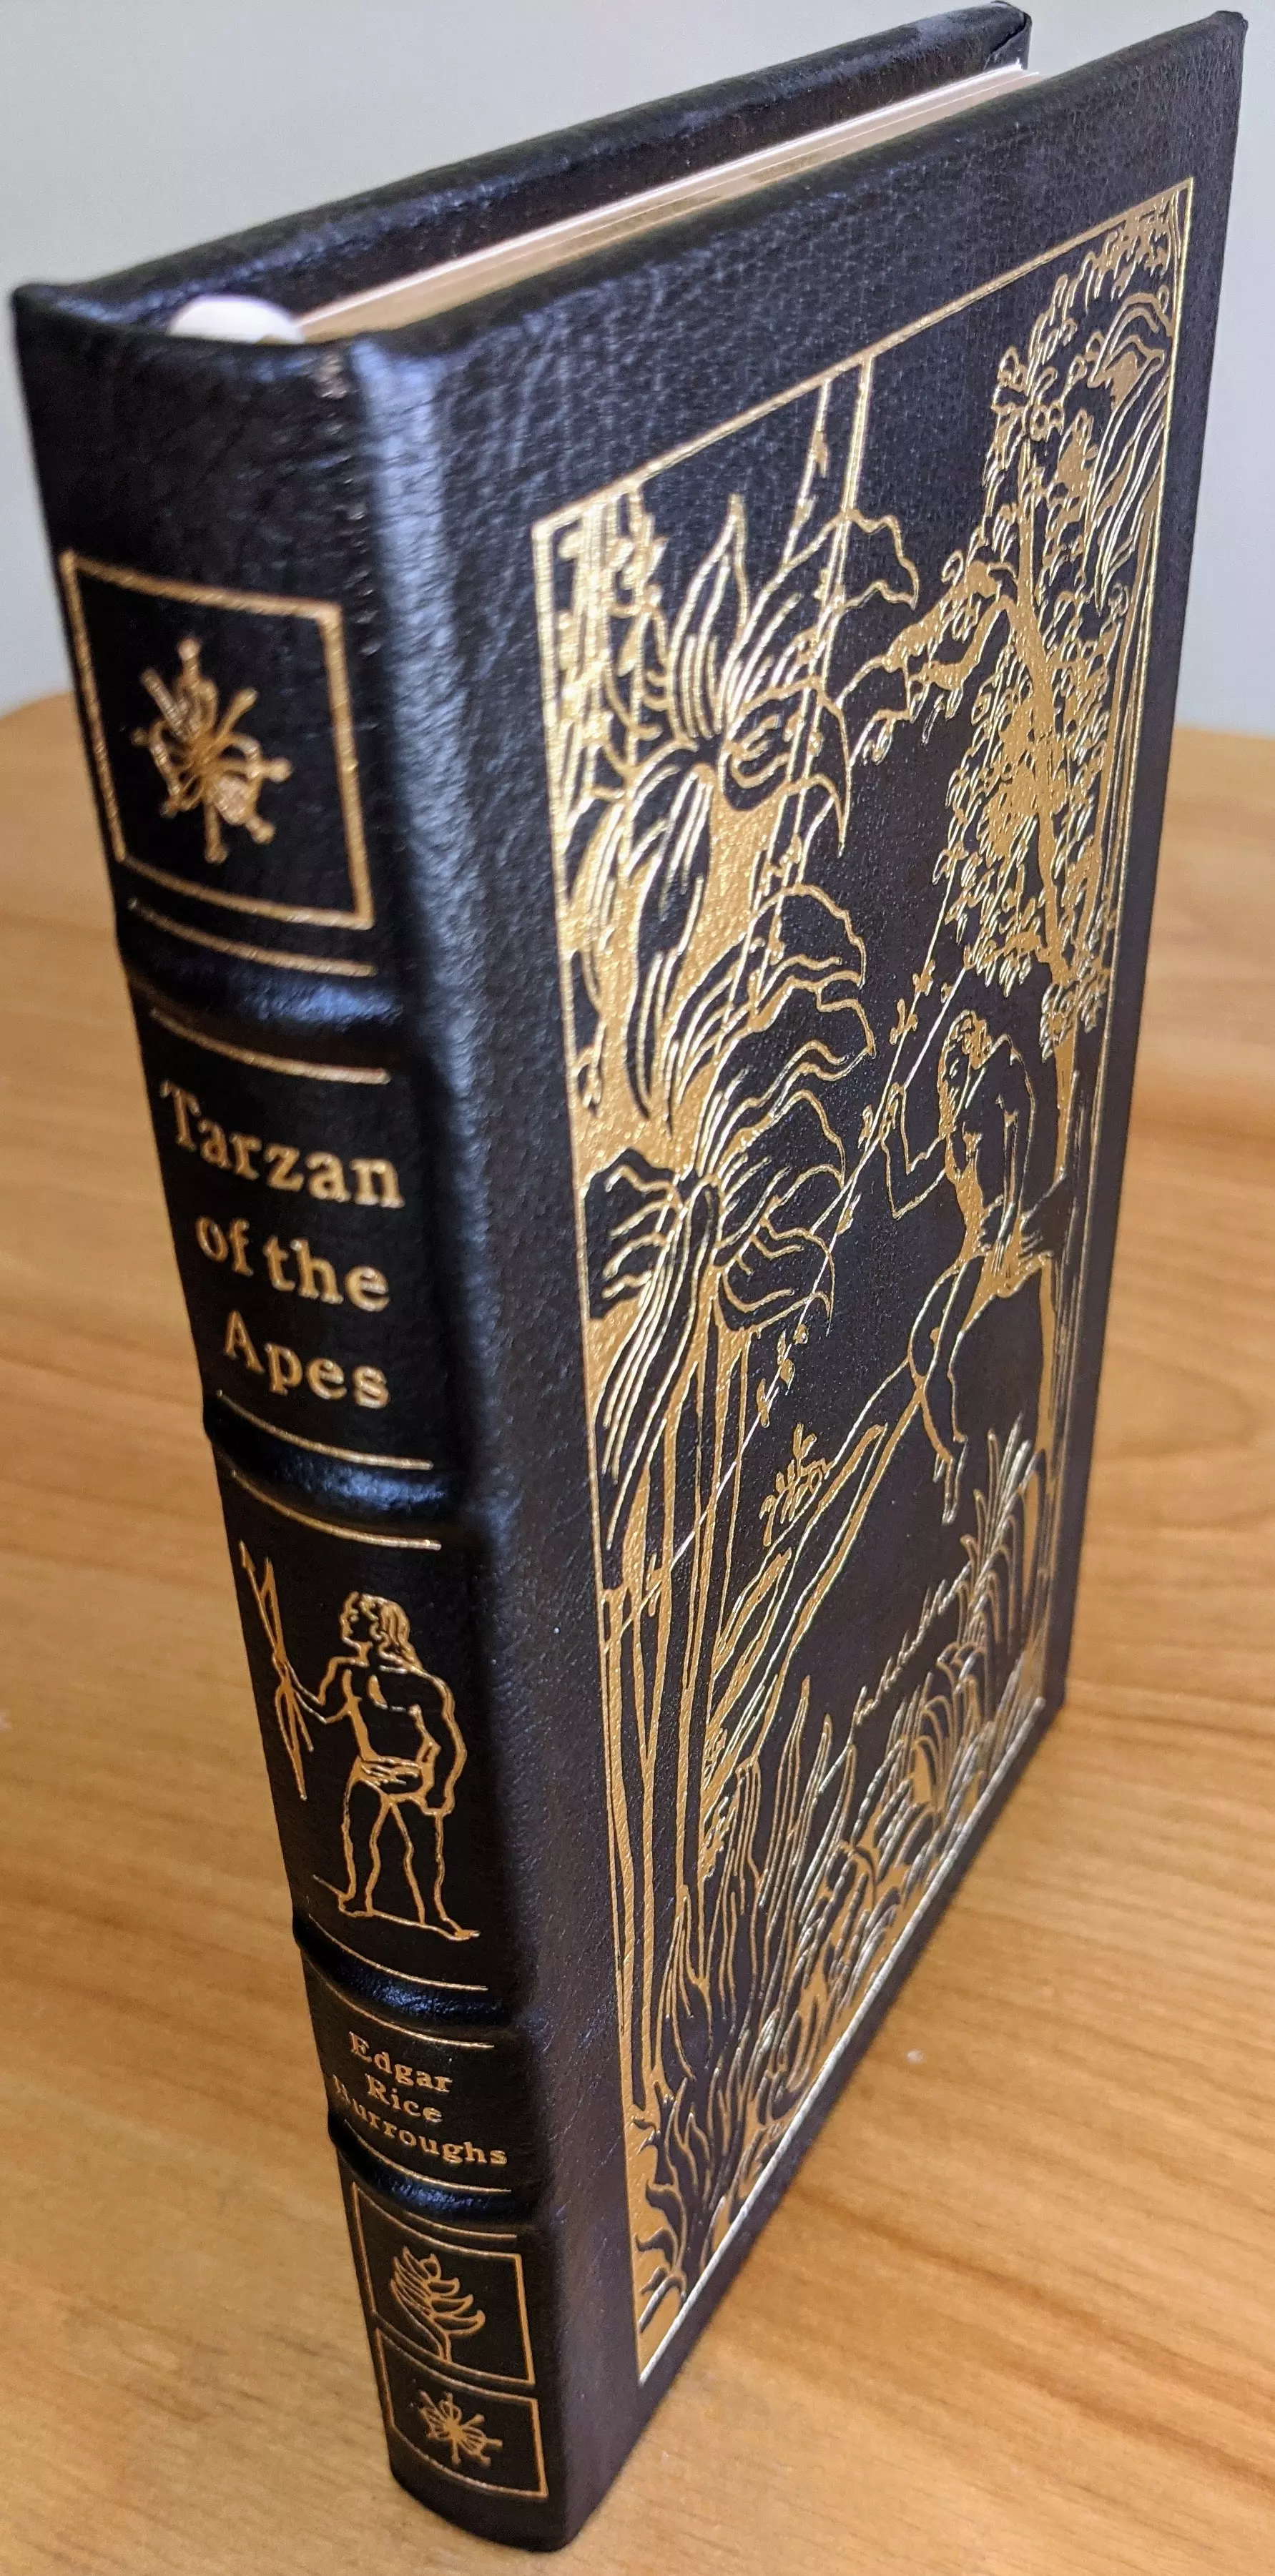 Stunning Black Leather Bound hardback book with hubbed spine, cover artwork in 22kt gold, printed on archival paper with gold gilded edges, smyth sewing & concealed muslin joints
	  - original artwork by Kent Bash